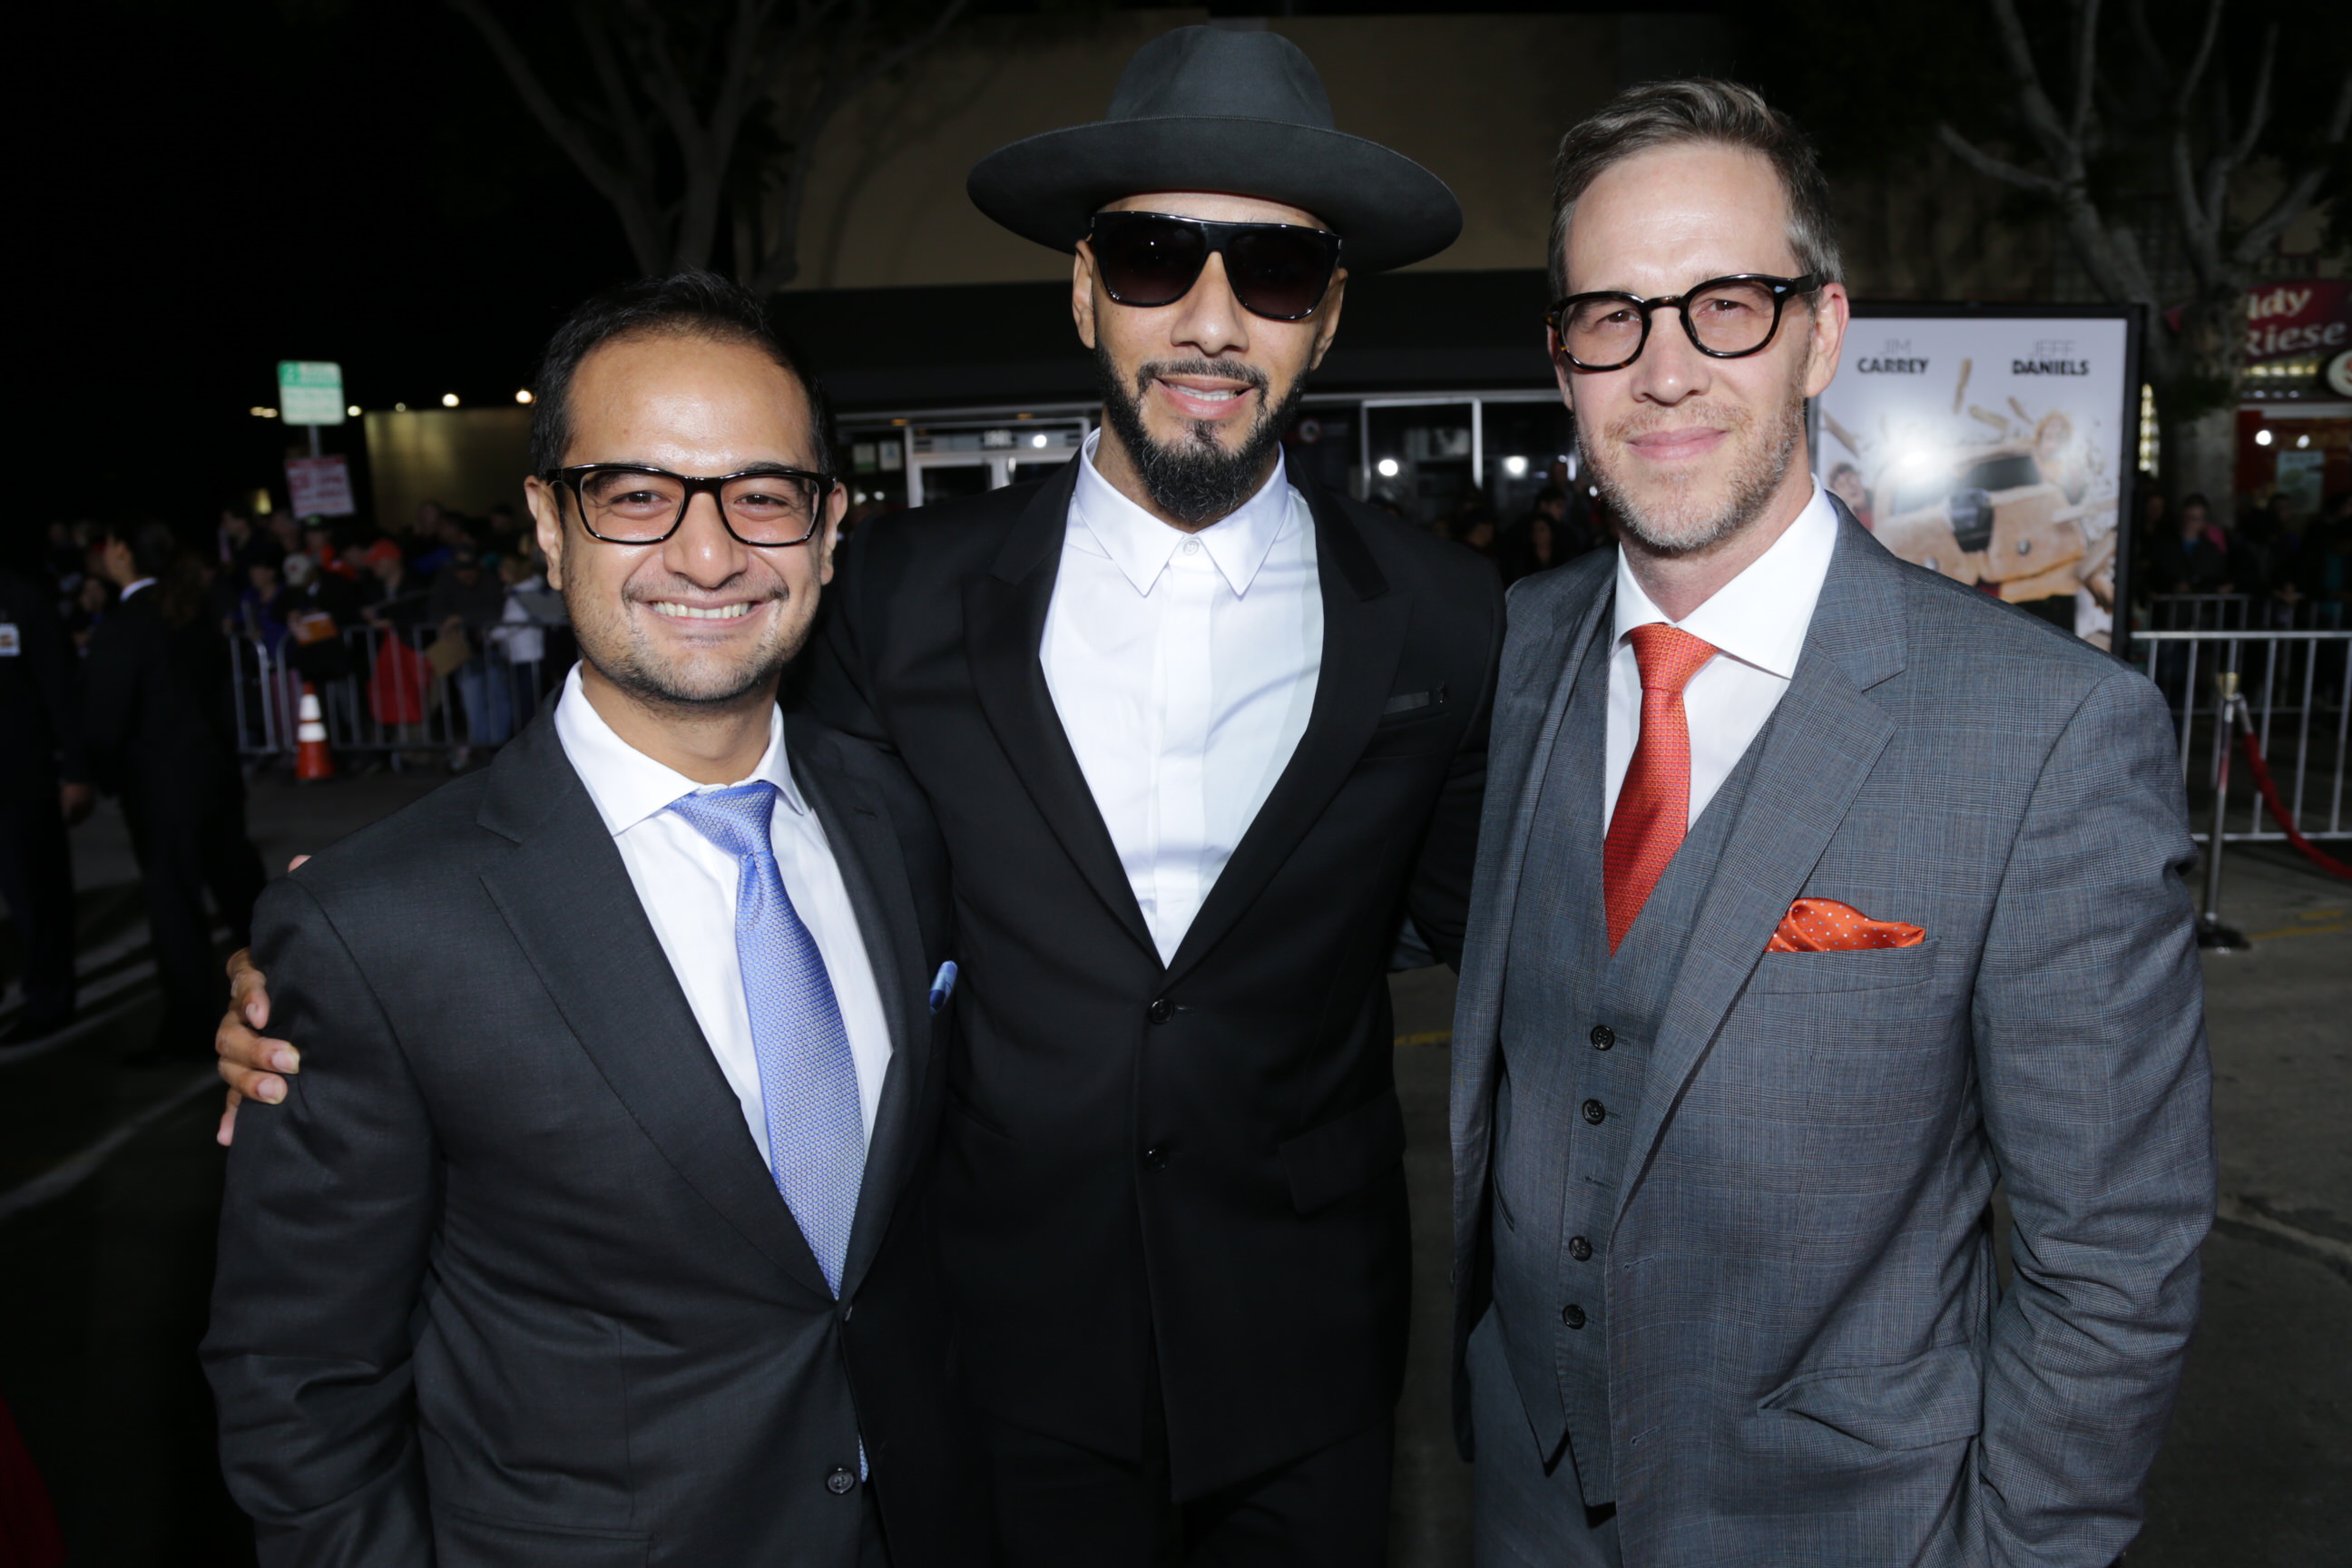 Riza Aziz, Swizz Beatz and Joey McFarland at the Dumb and Dumber To Premiere in Los Angeles.